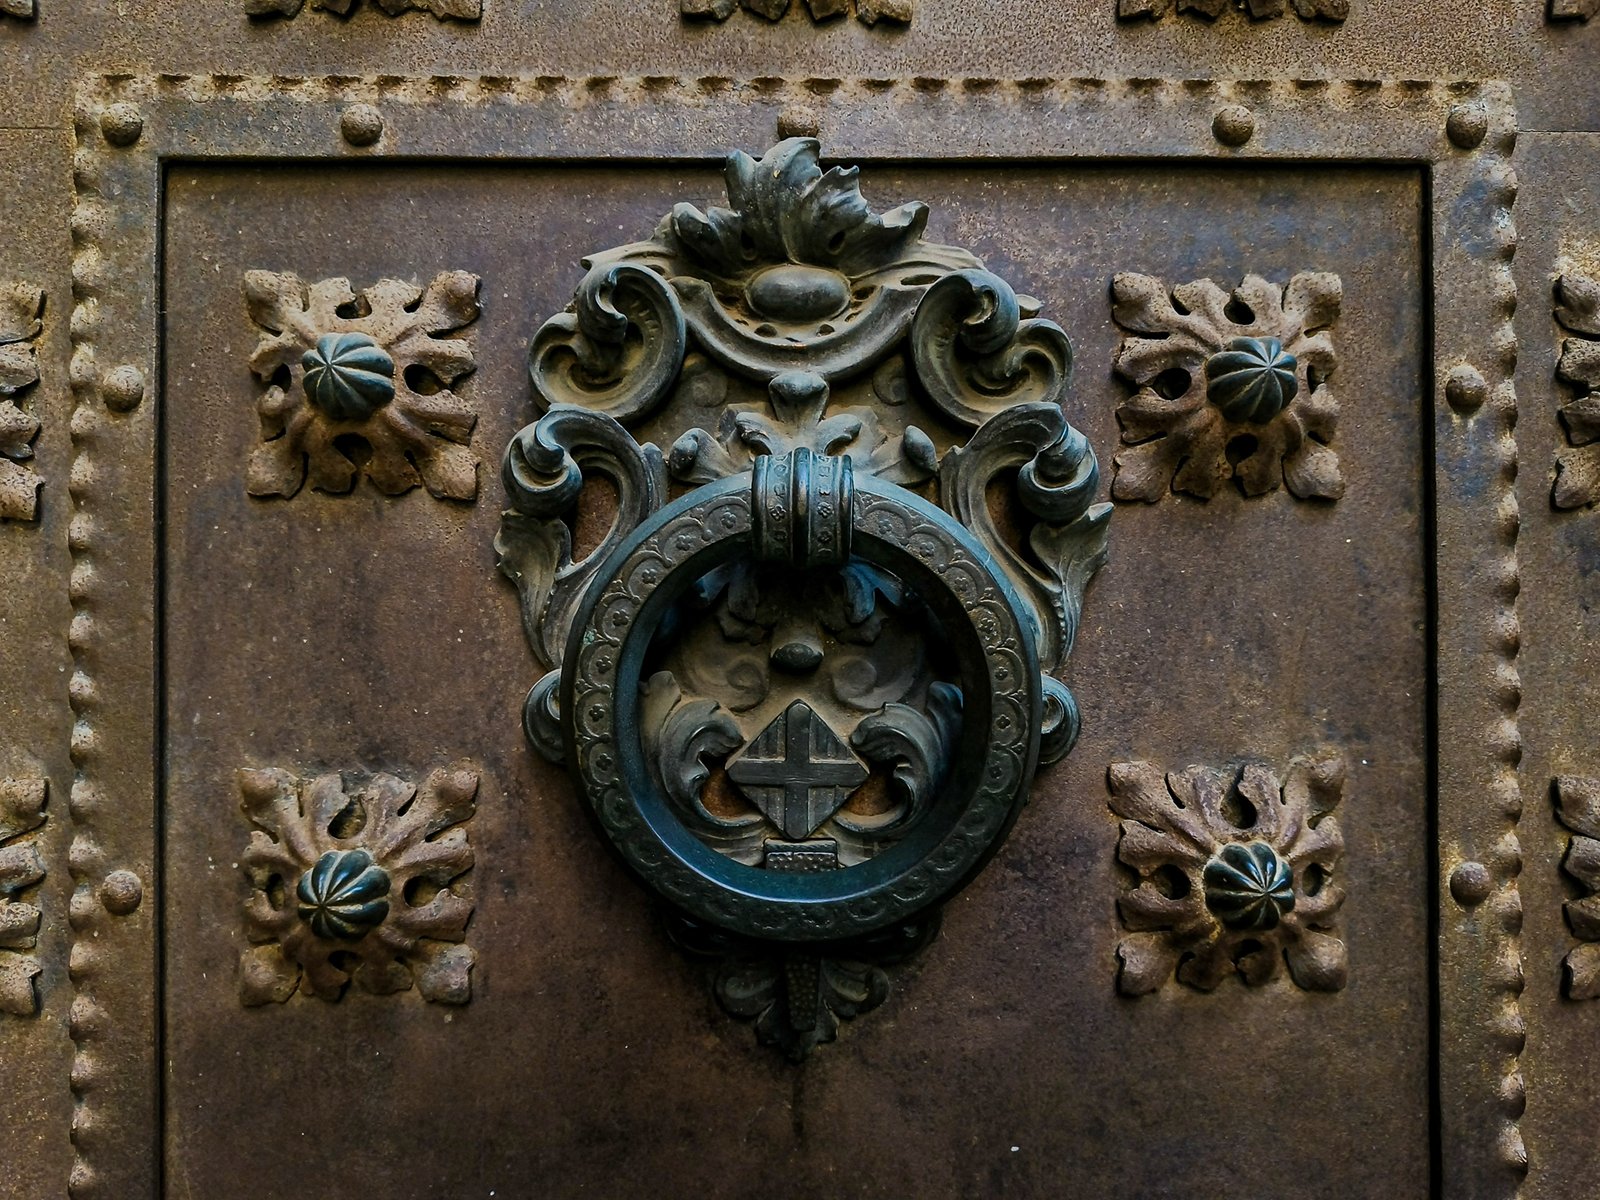 Ancient ornate metal door knocker featuring a lion's head surrounded by decorative floral patterns on a weathered iron door.